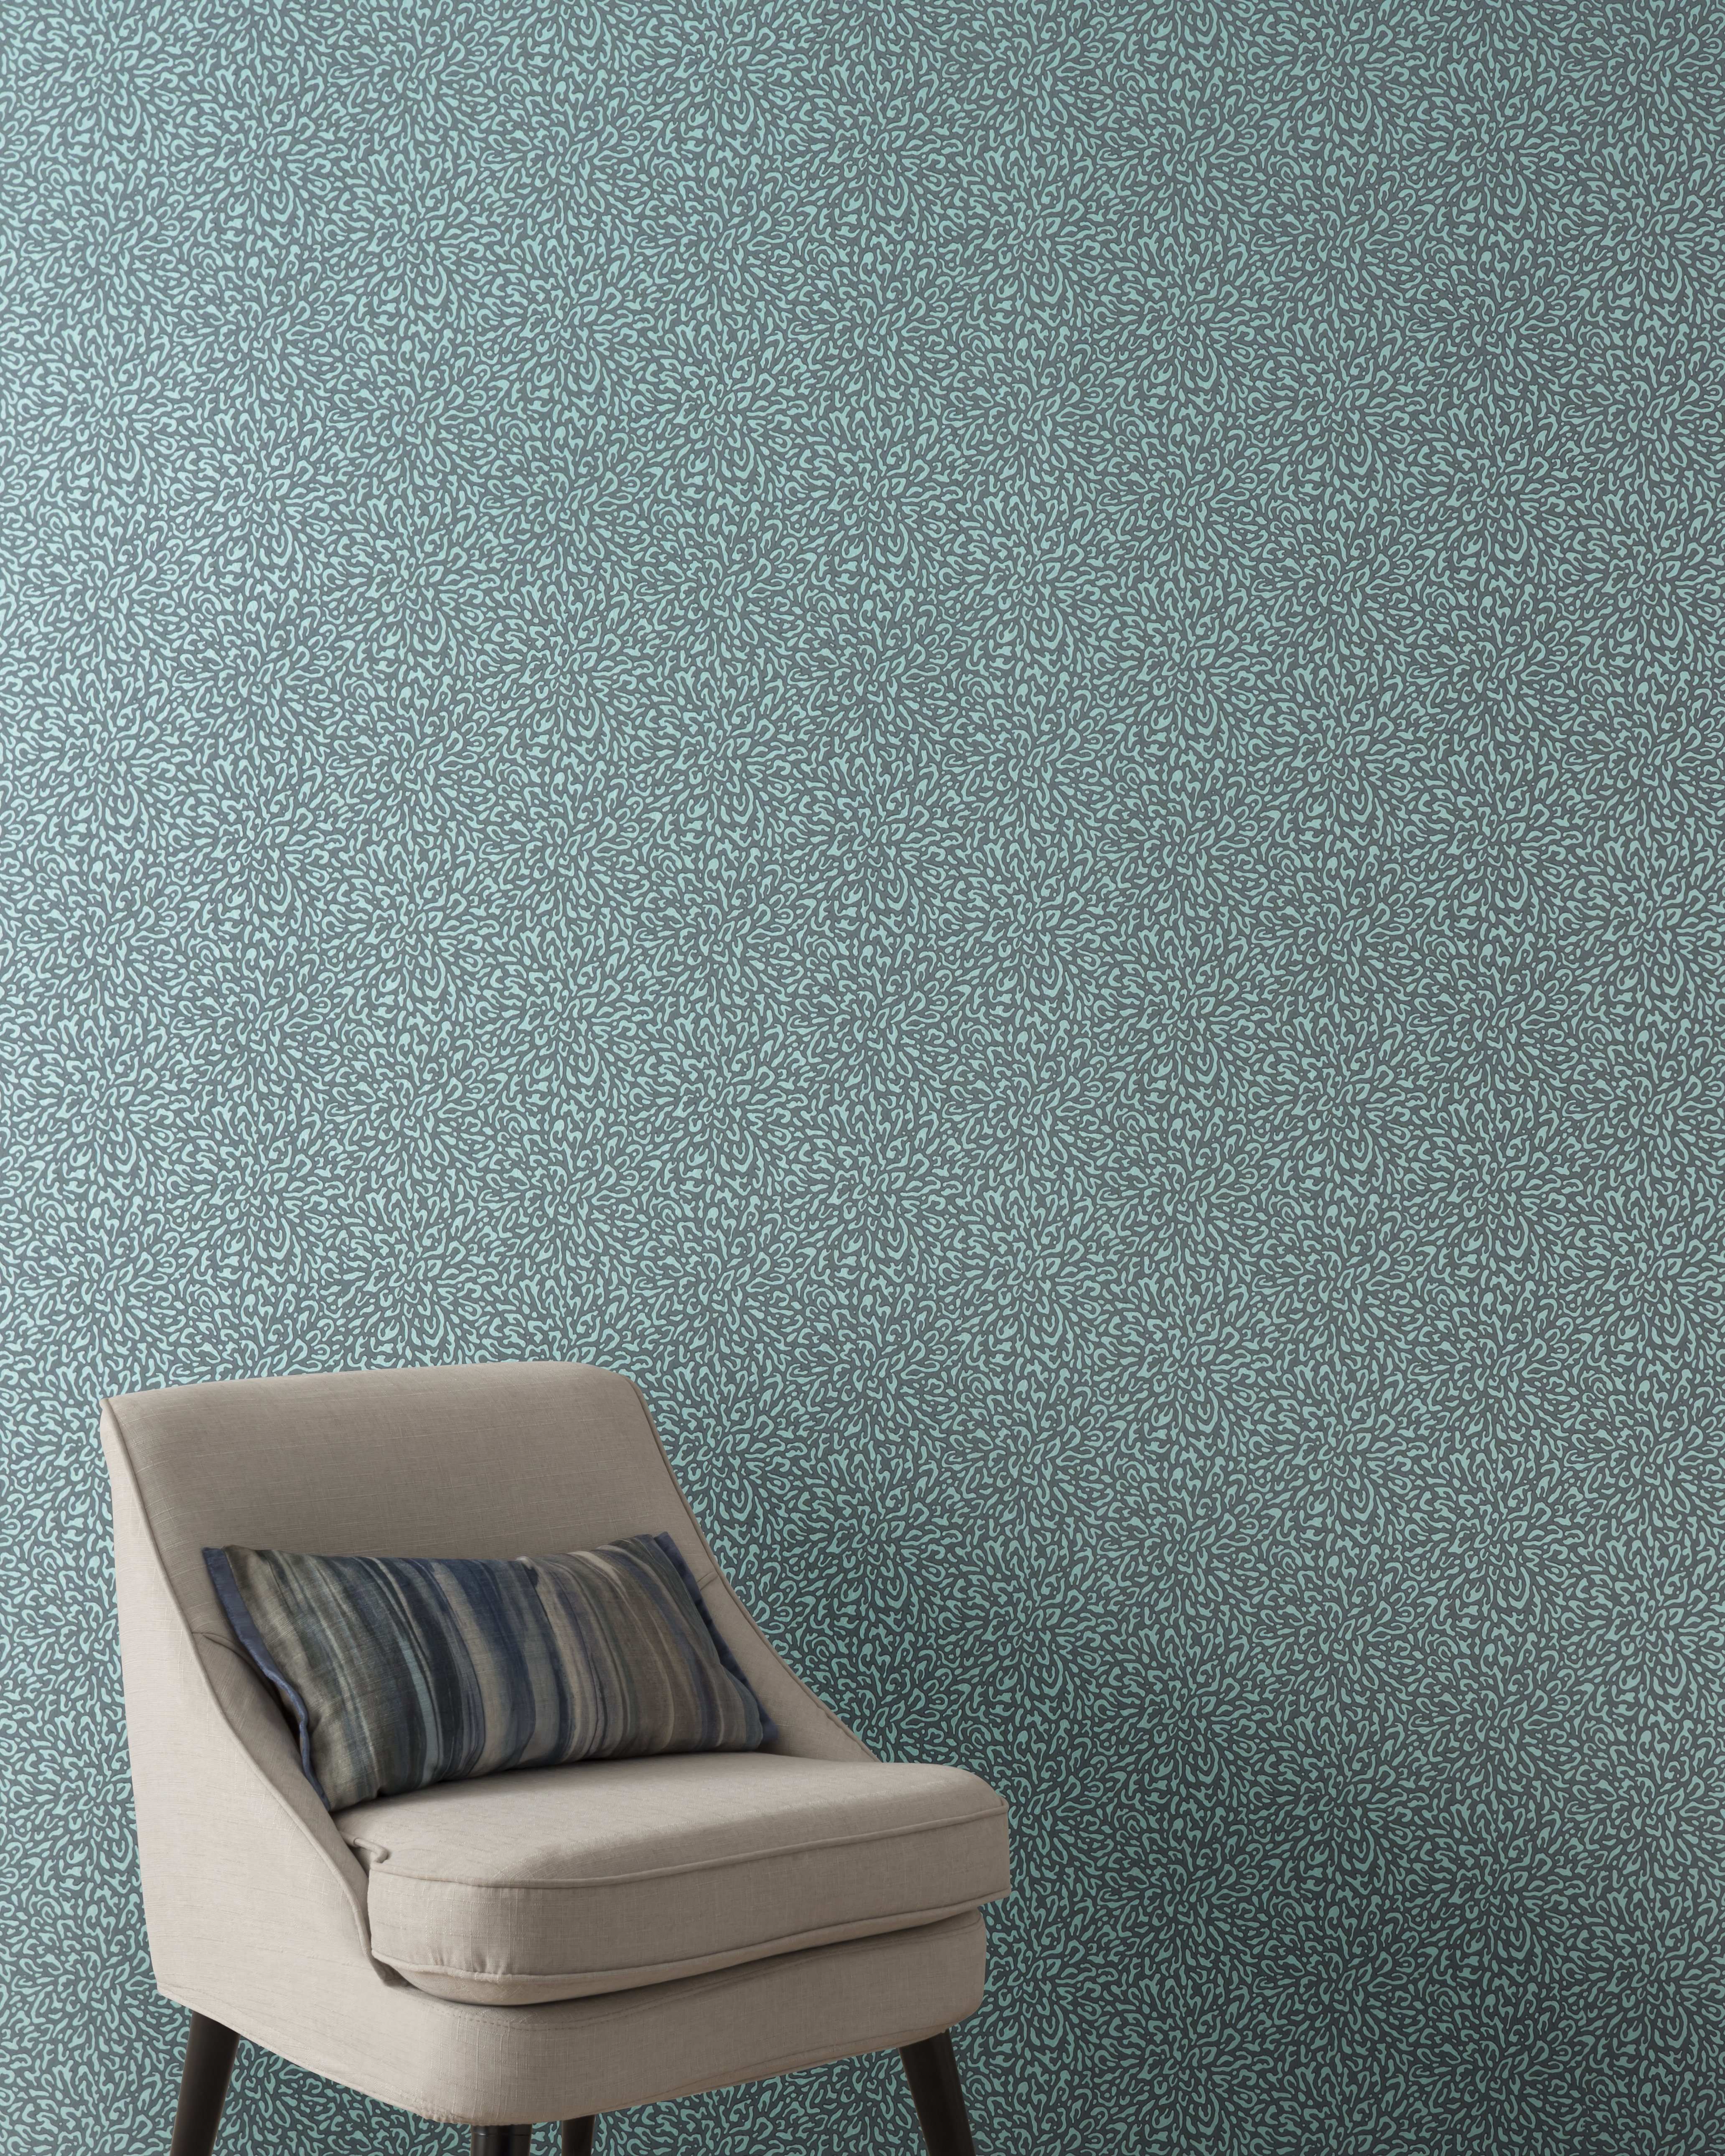 Tapet Corallo, 1838 Wallcoverings, 5.3mp / rola 1838 Wallcoverings